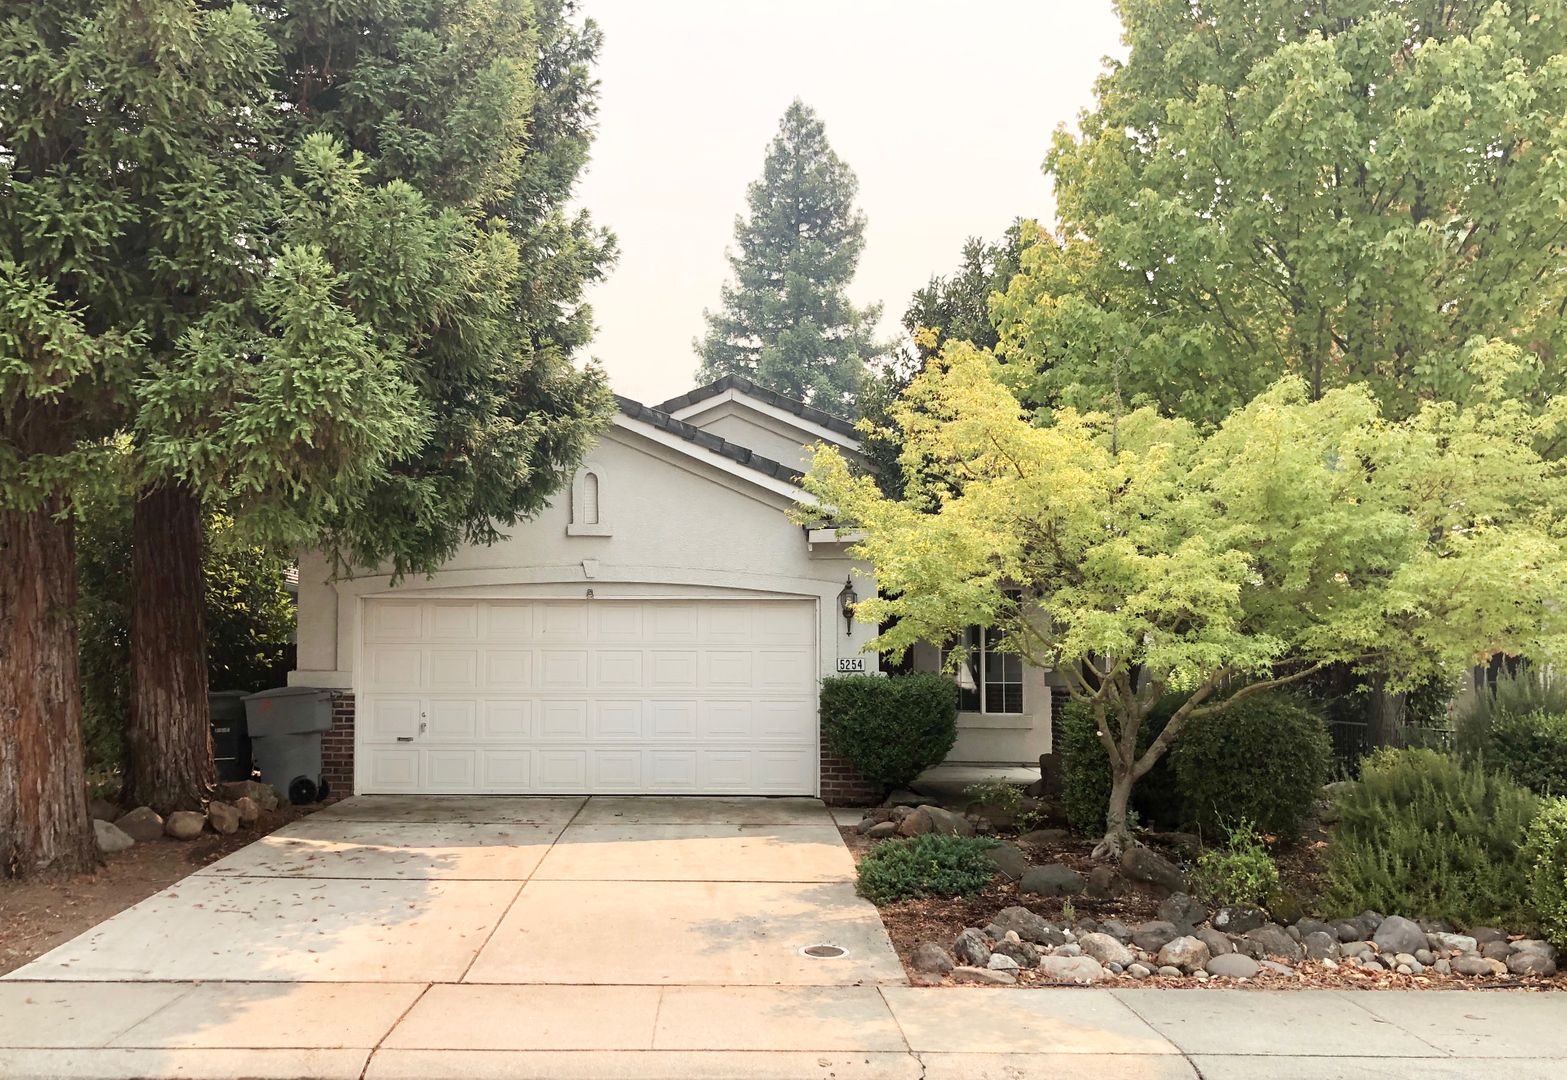 Nice 3 Bedroom Single Story Home for Rent in Prime Rocklin Location